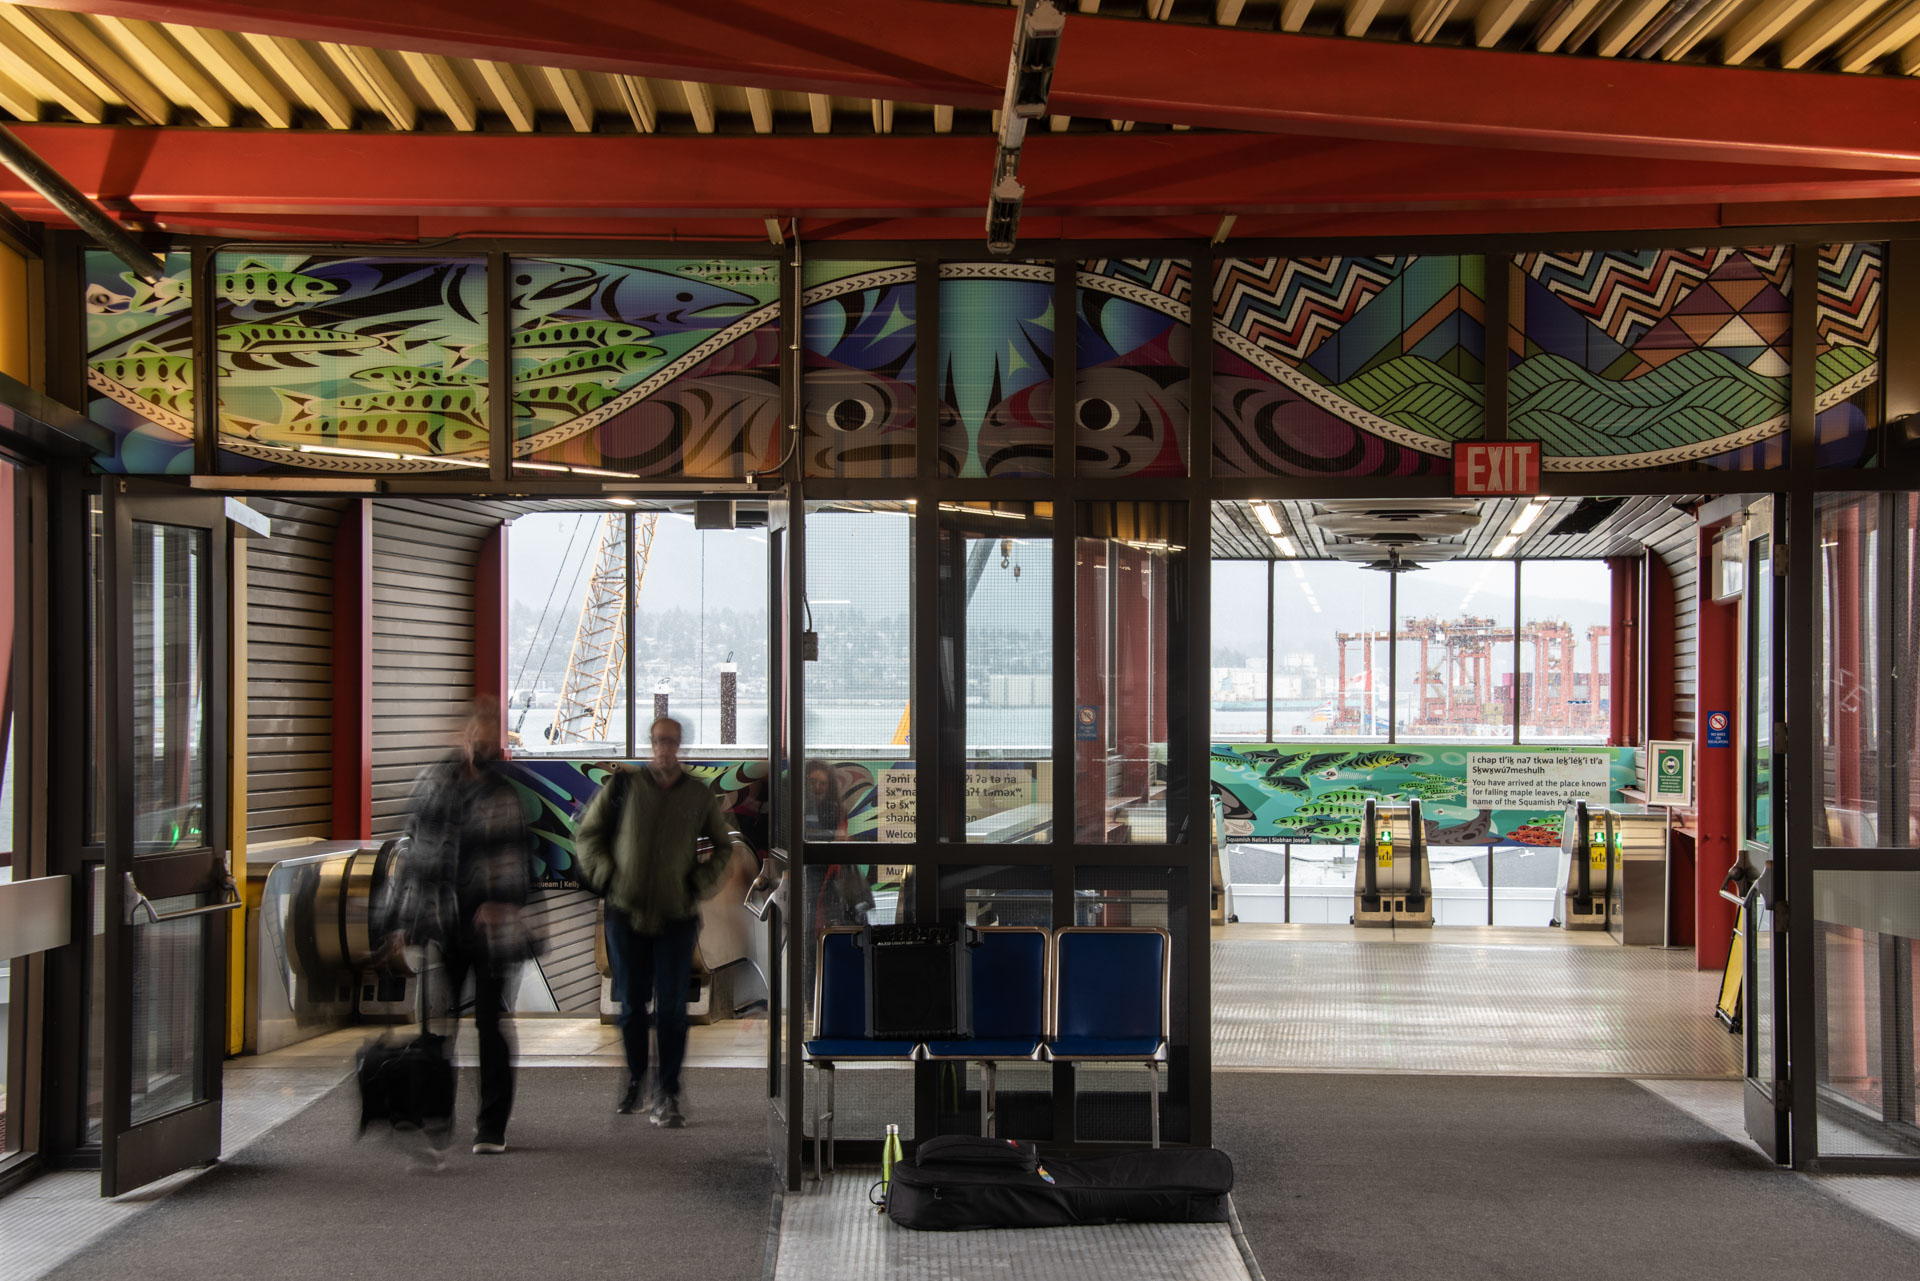 The art above the doors to the escalators to the SeaBus terminal at Waterfront Station